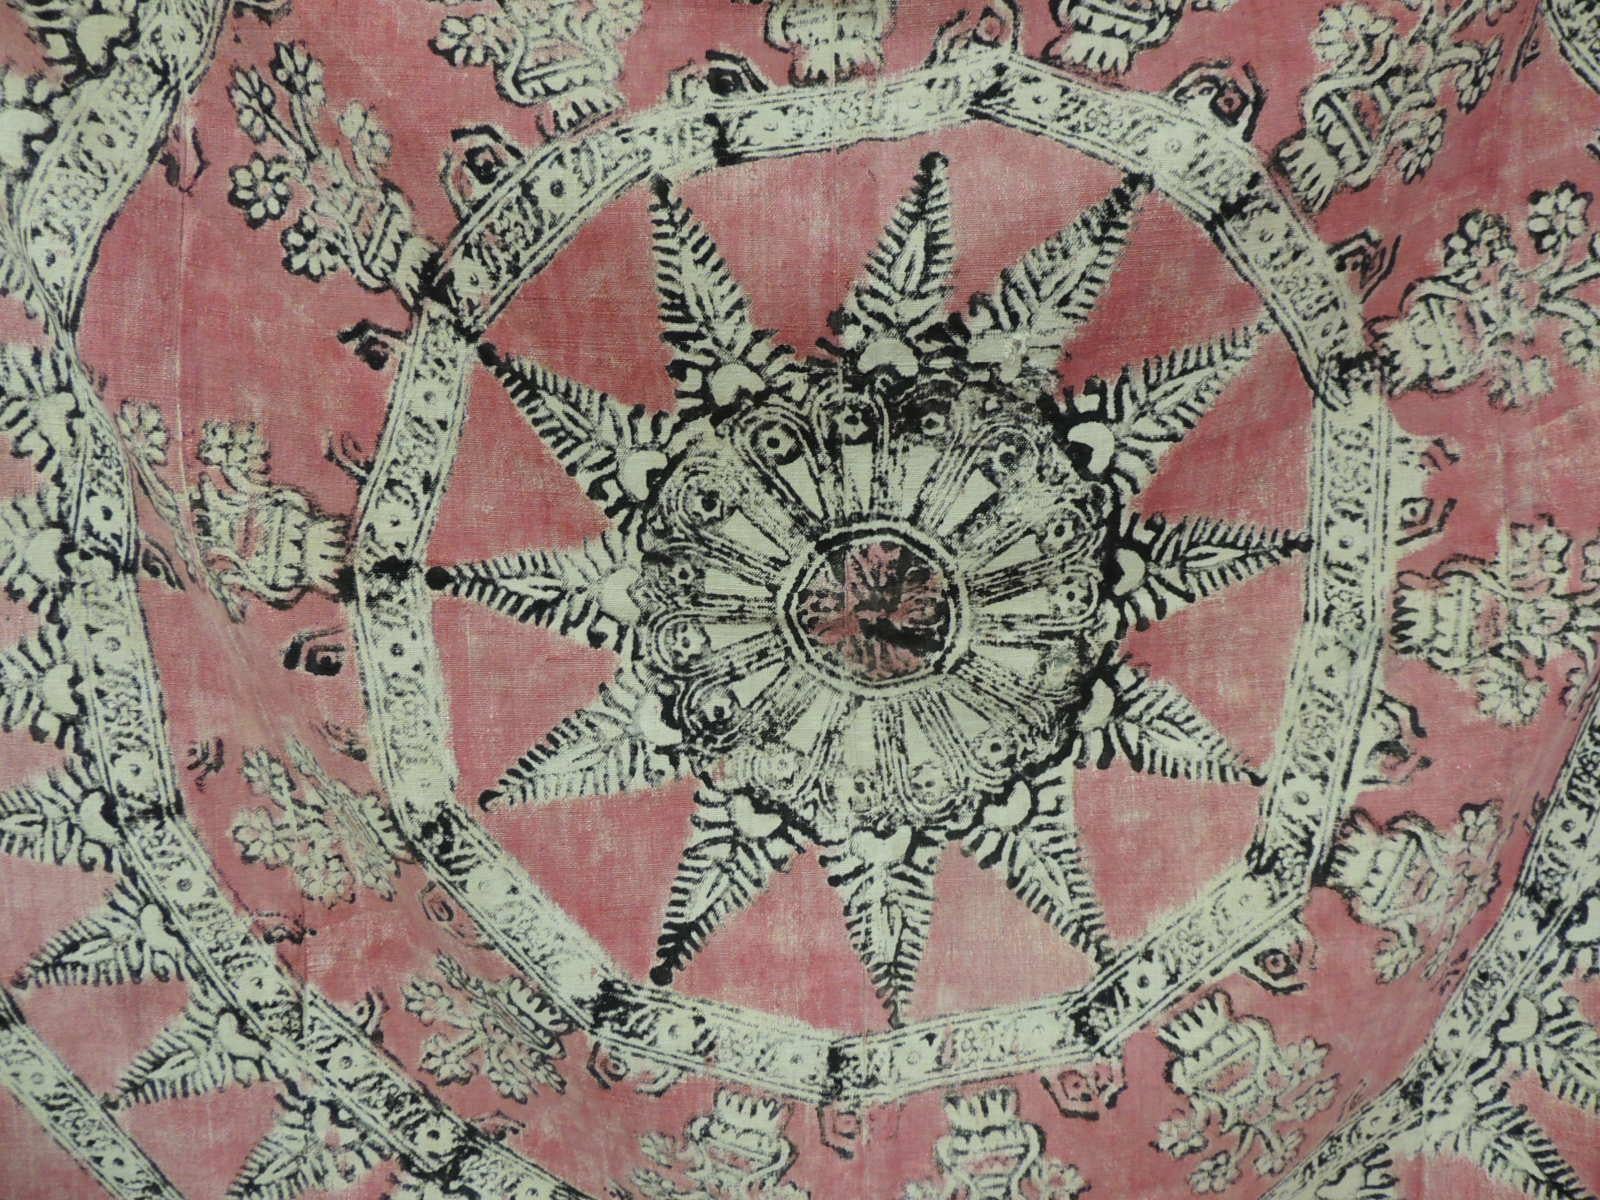 Hand-Crafted Antique Pink and Black Linen Hand Printed Indian Cloth